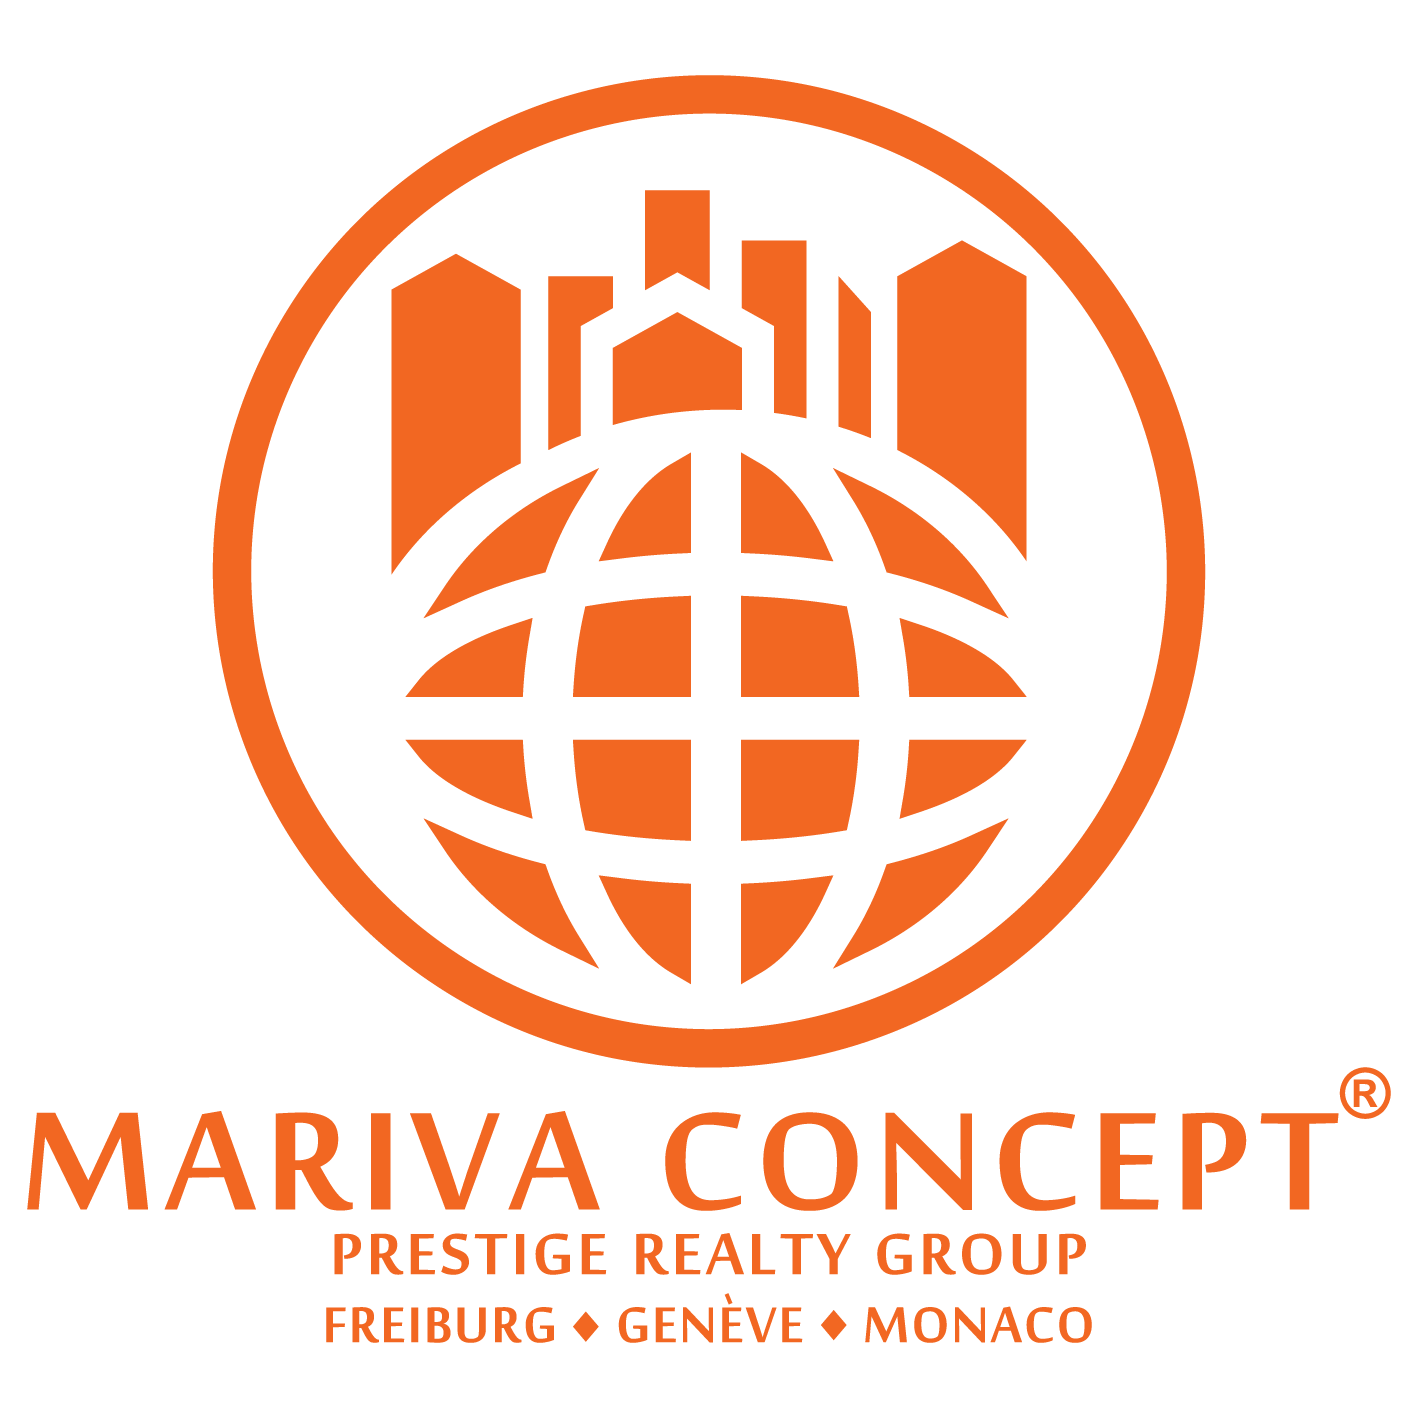 MARIVA CONCEPT© INVESTMENT PARTNERS (MCIP)